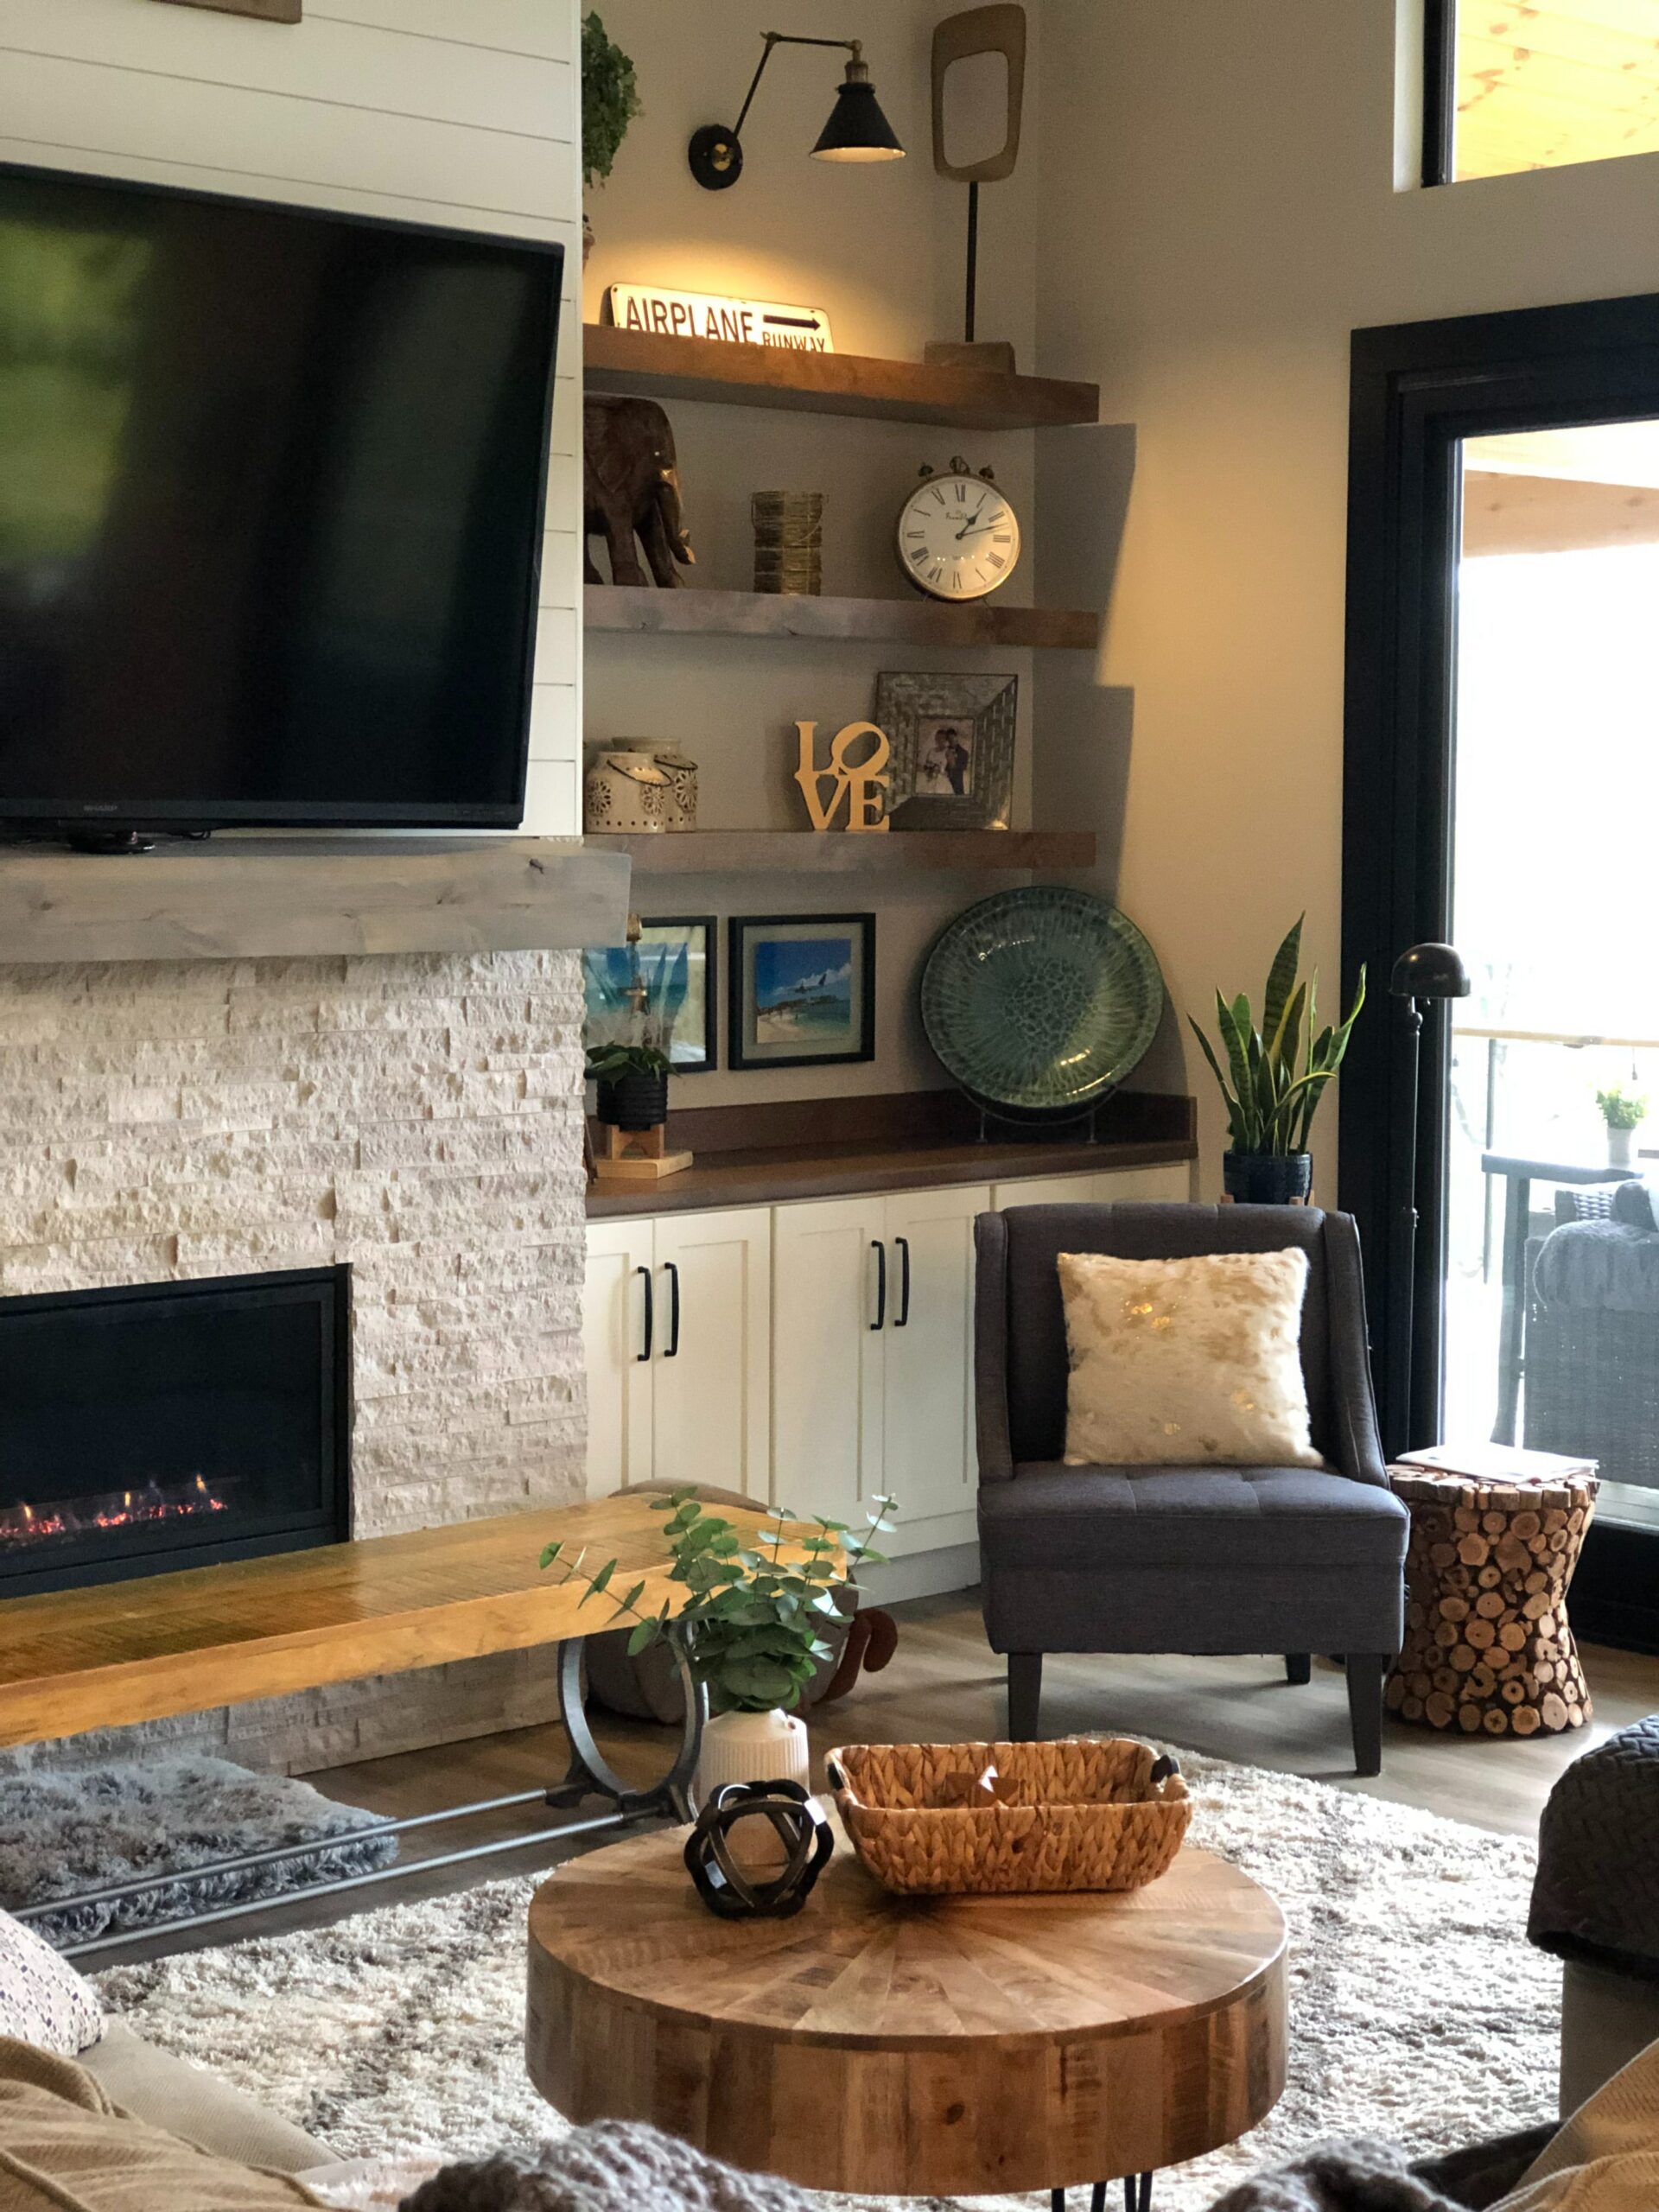 How To Mount TV Over A Brick Fireplace And Hide Wires